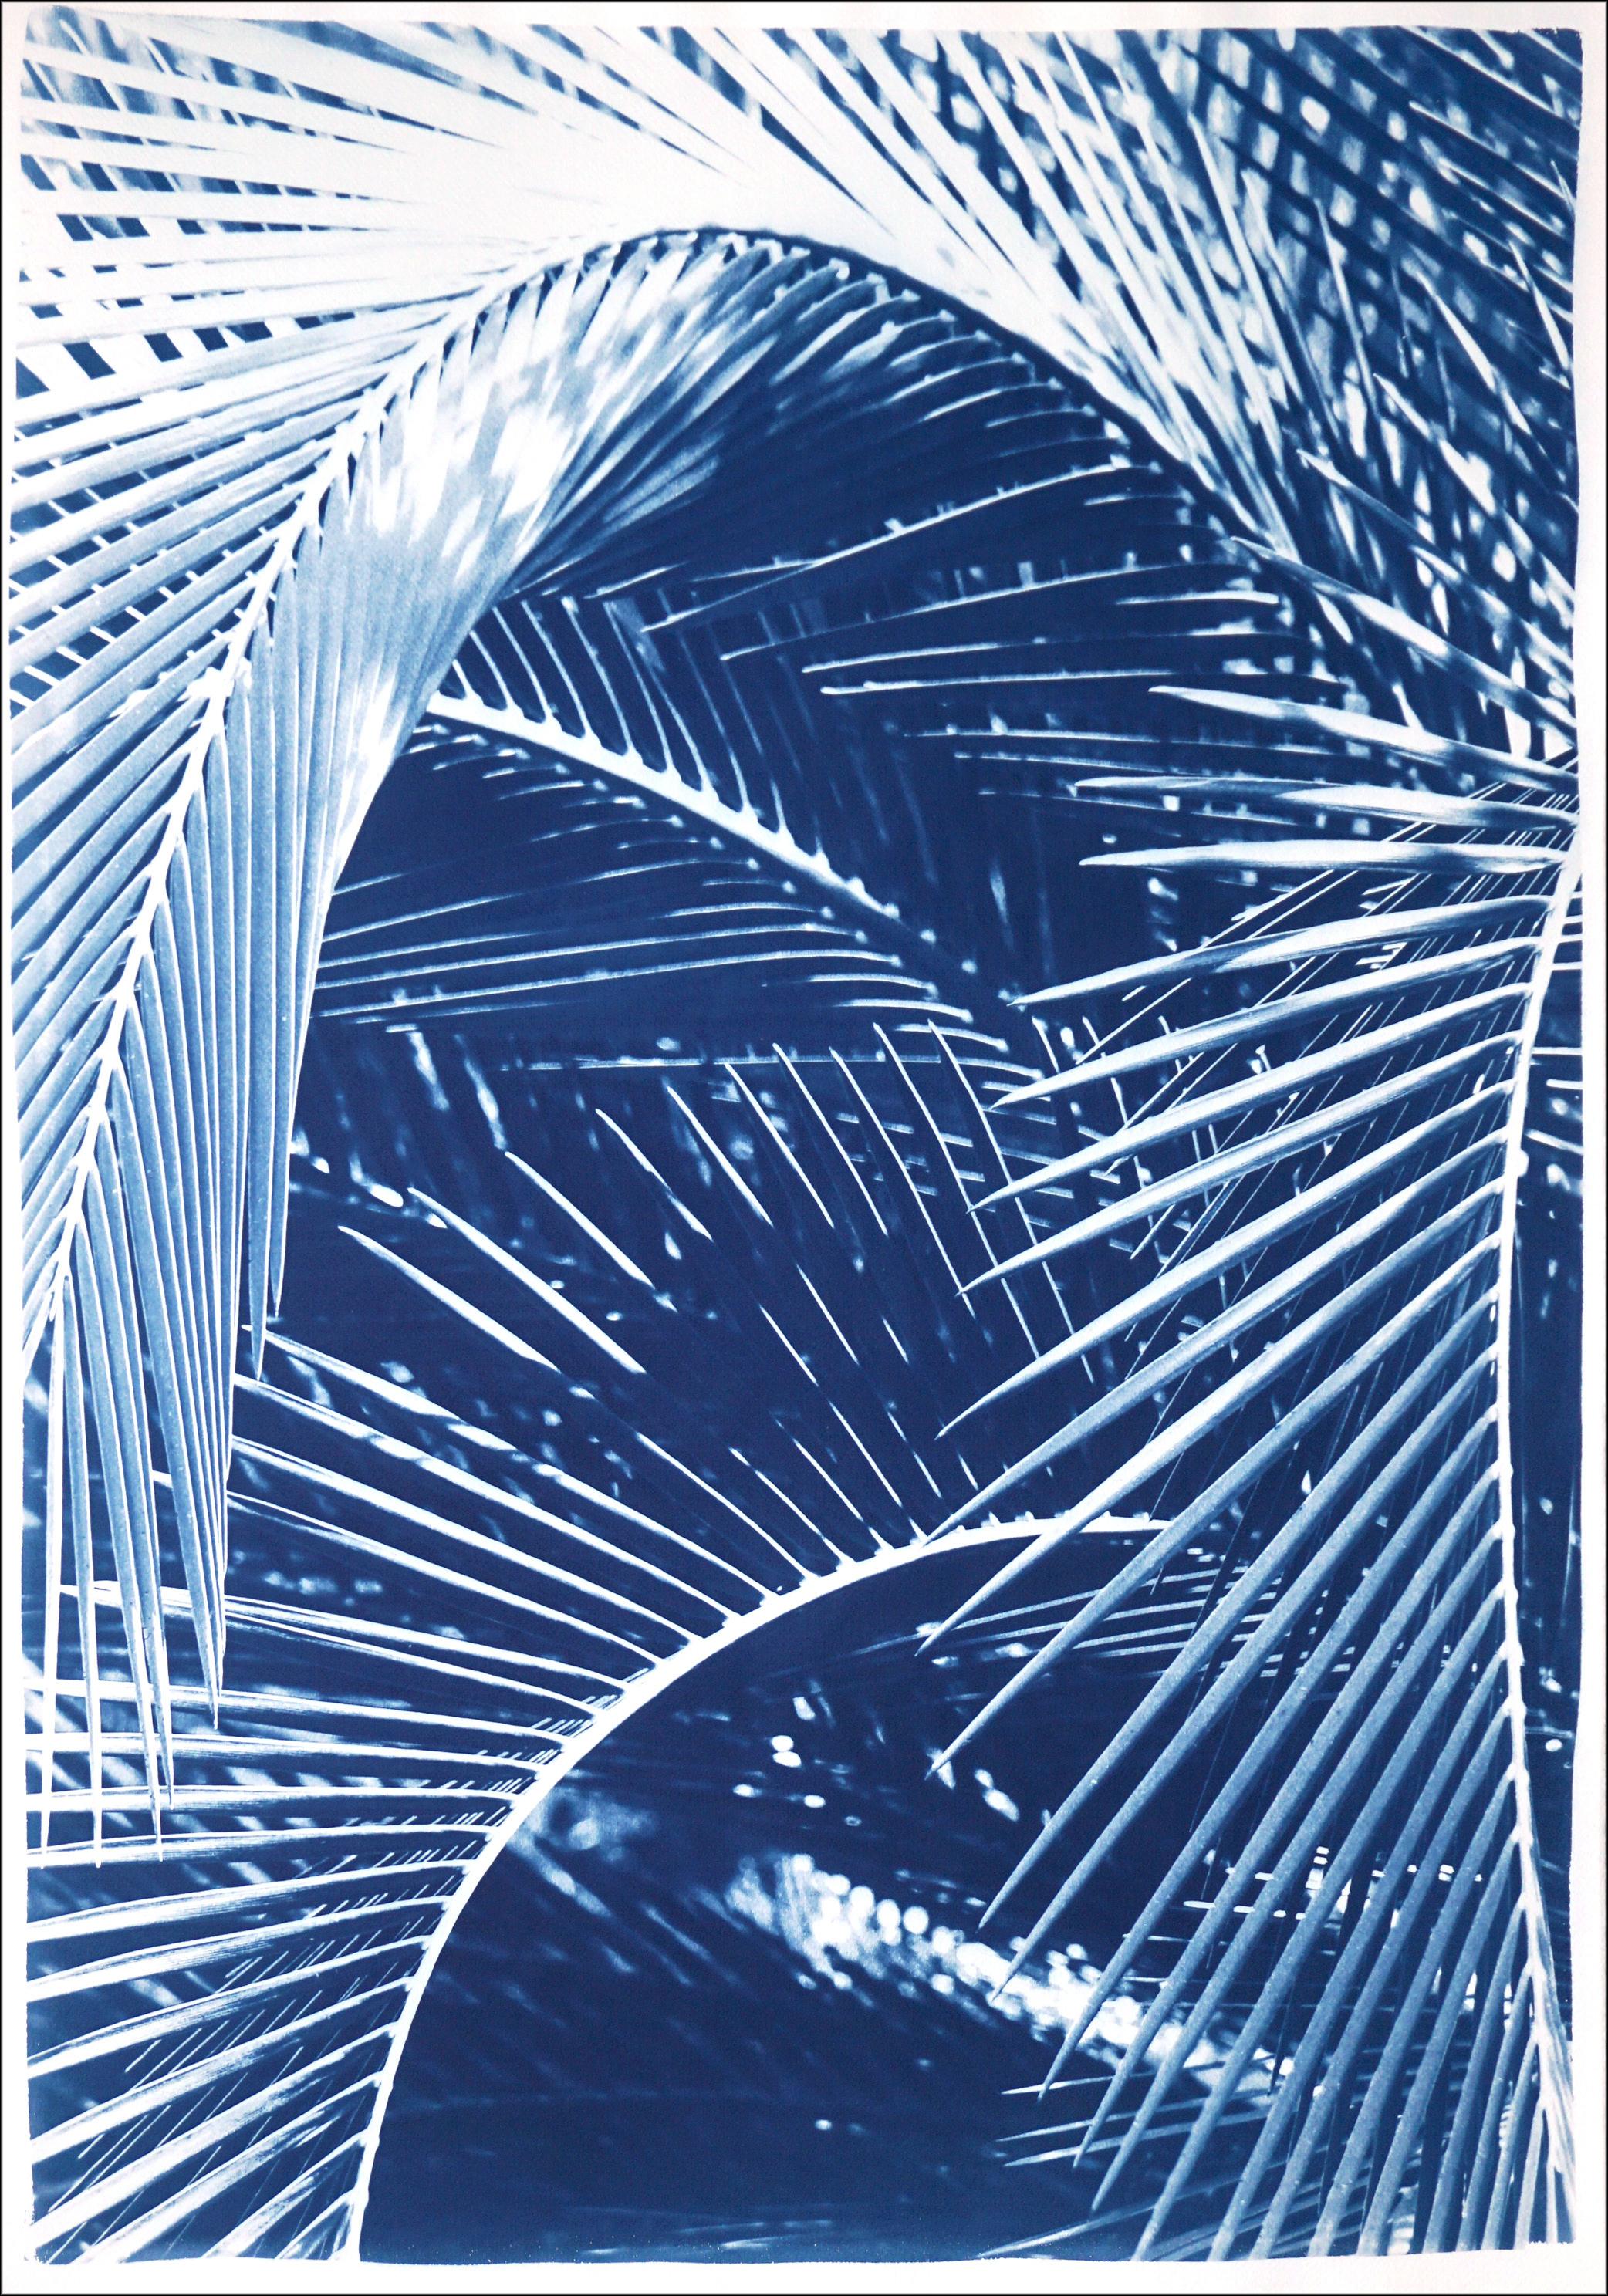 Lush Palm Bushes, Botanical Diptych, Still Life in Blue Tones, Tropical Style 5